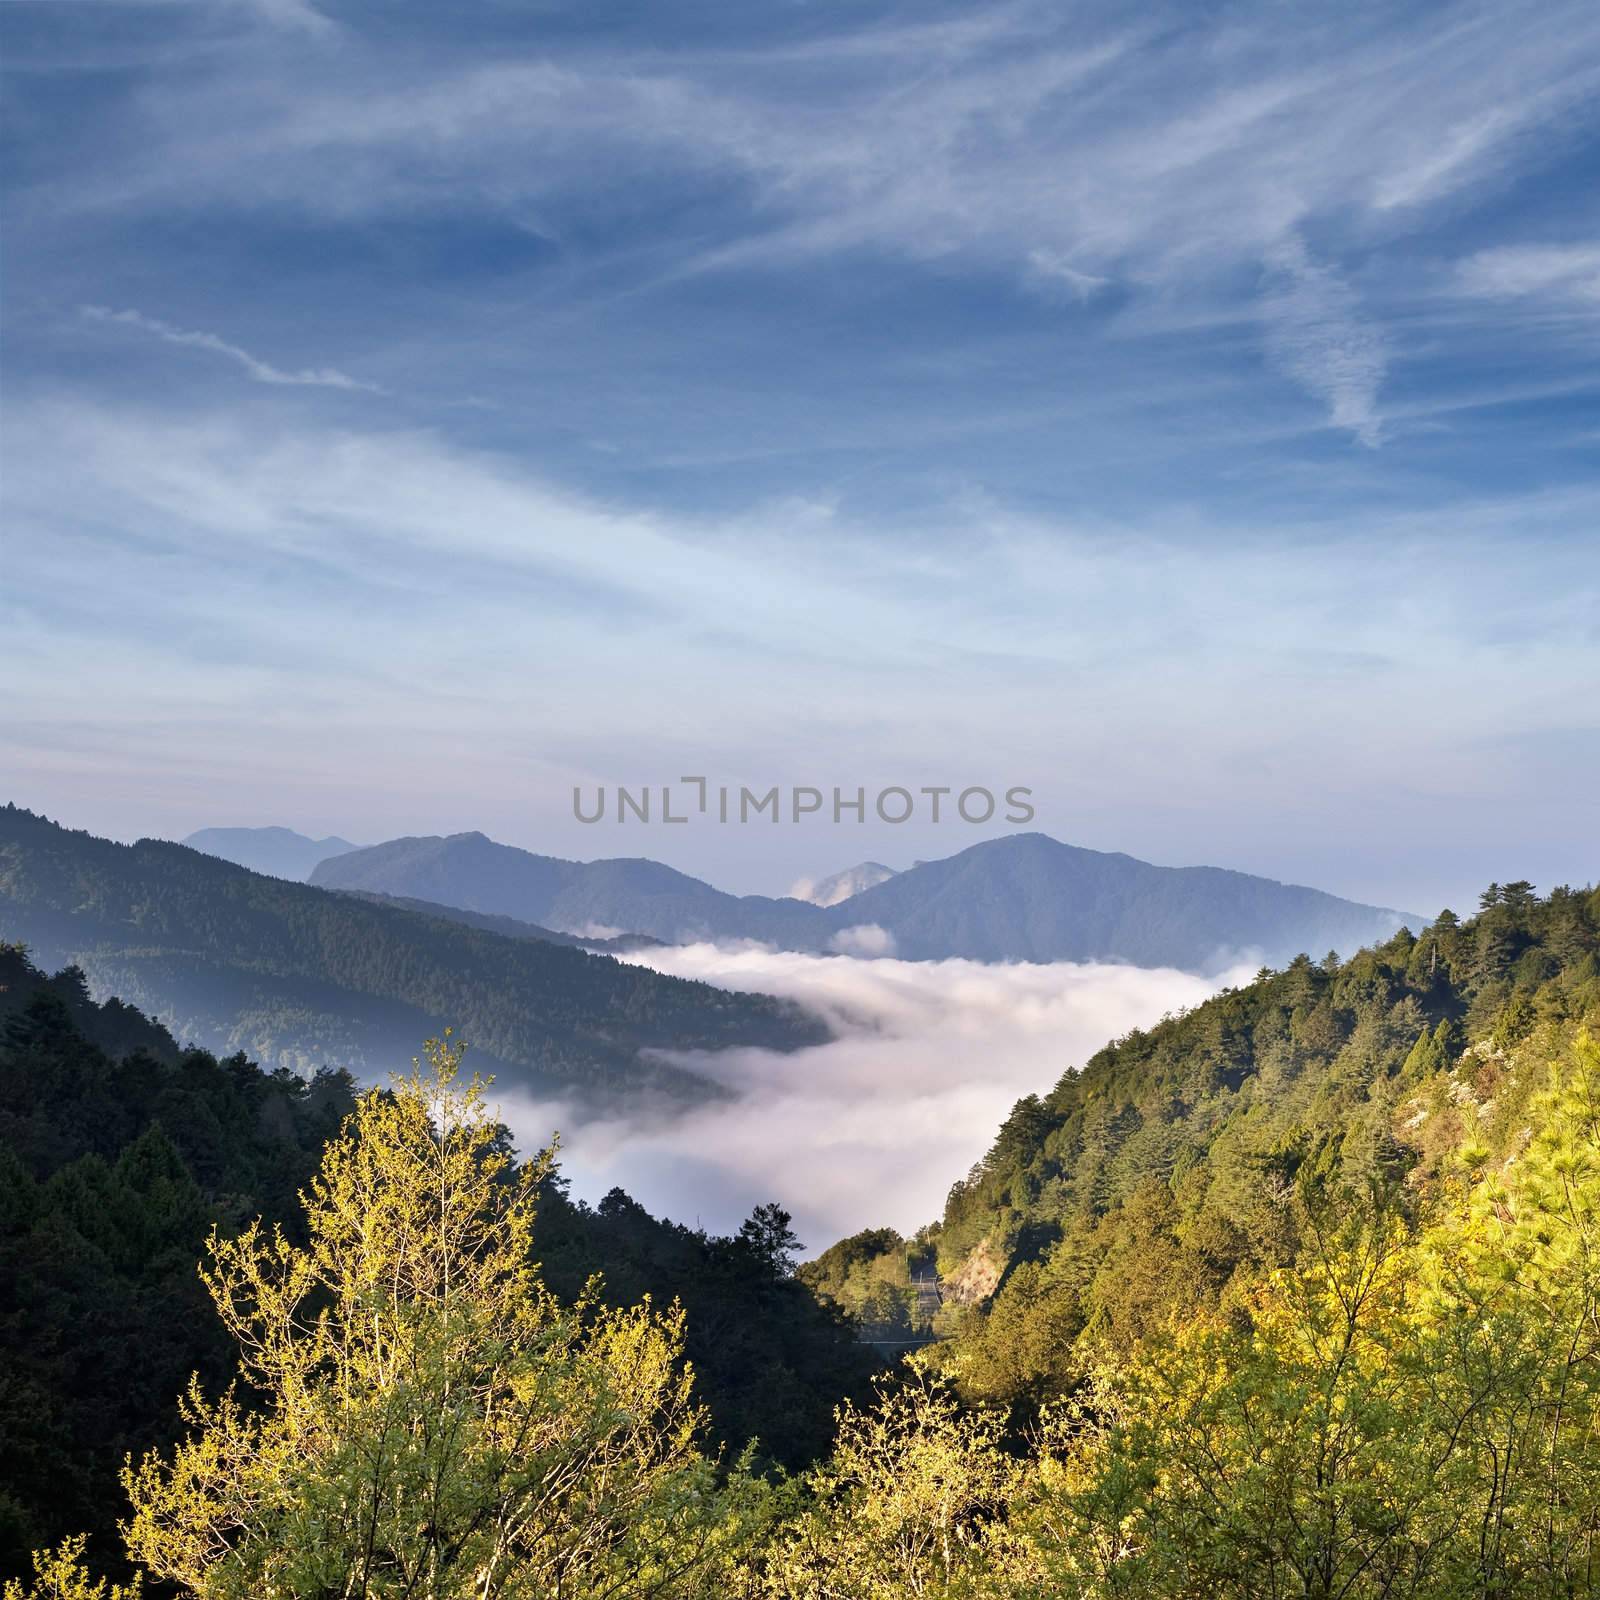 Mountain scenery with trees and clouds in Alishan National Scenic Area, Taiwan, Asia.